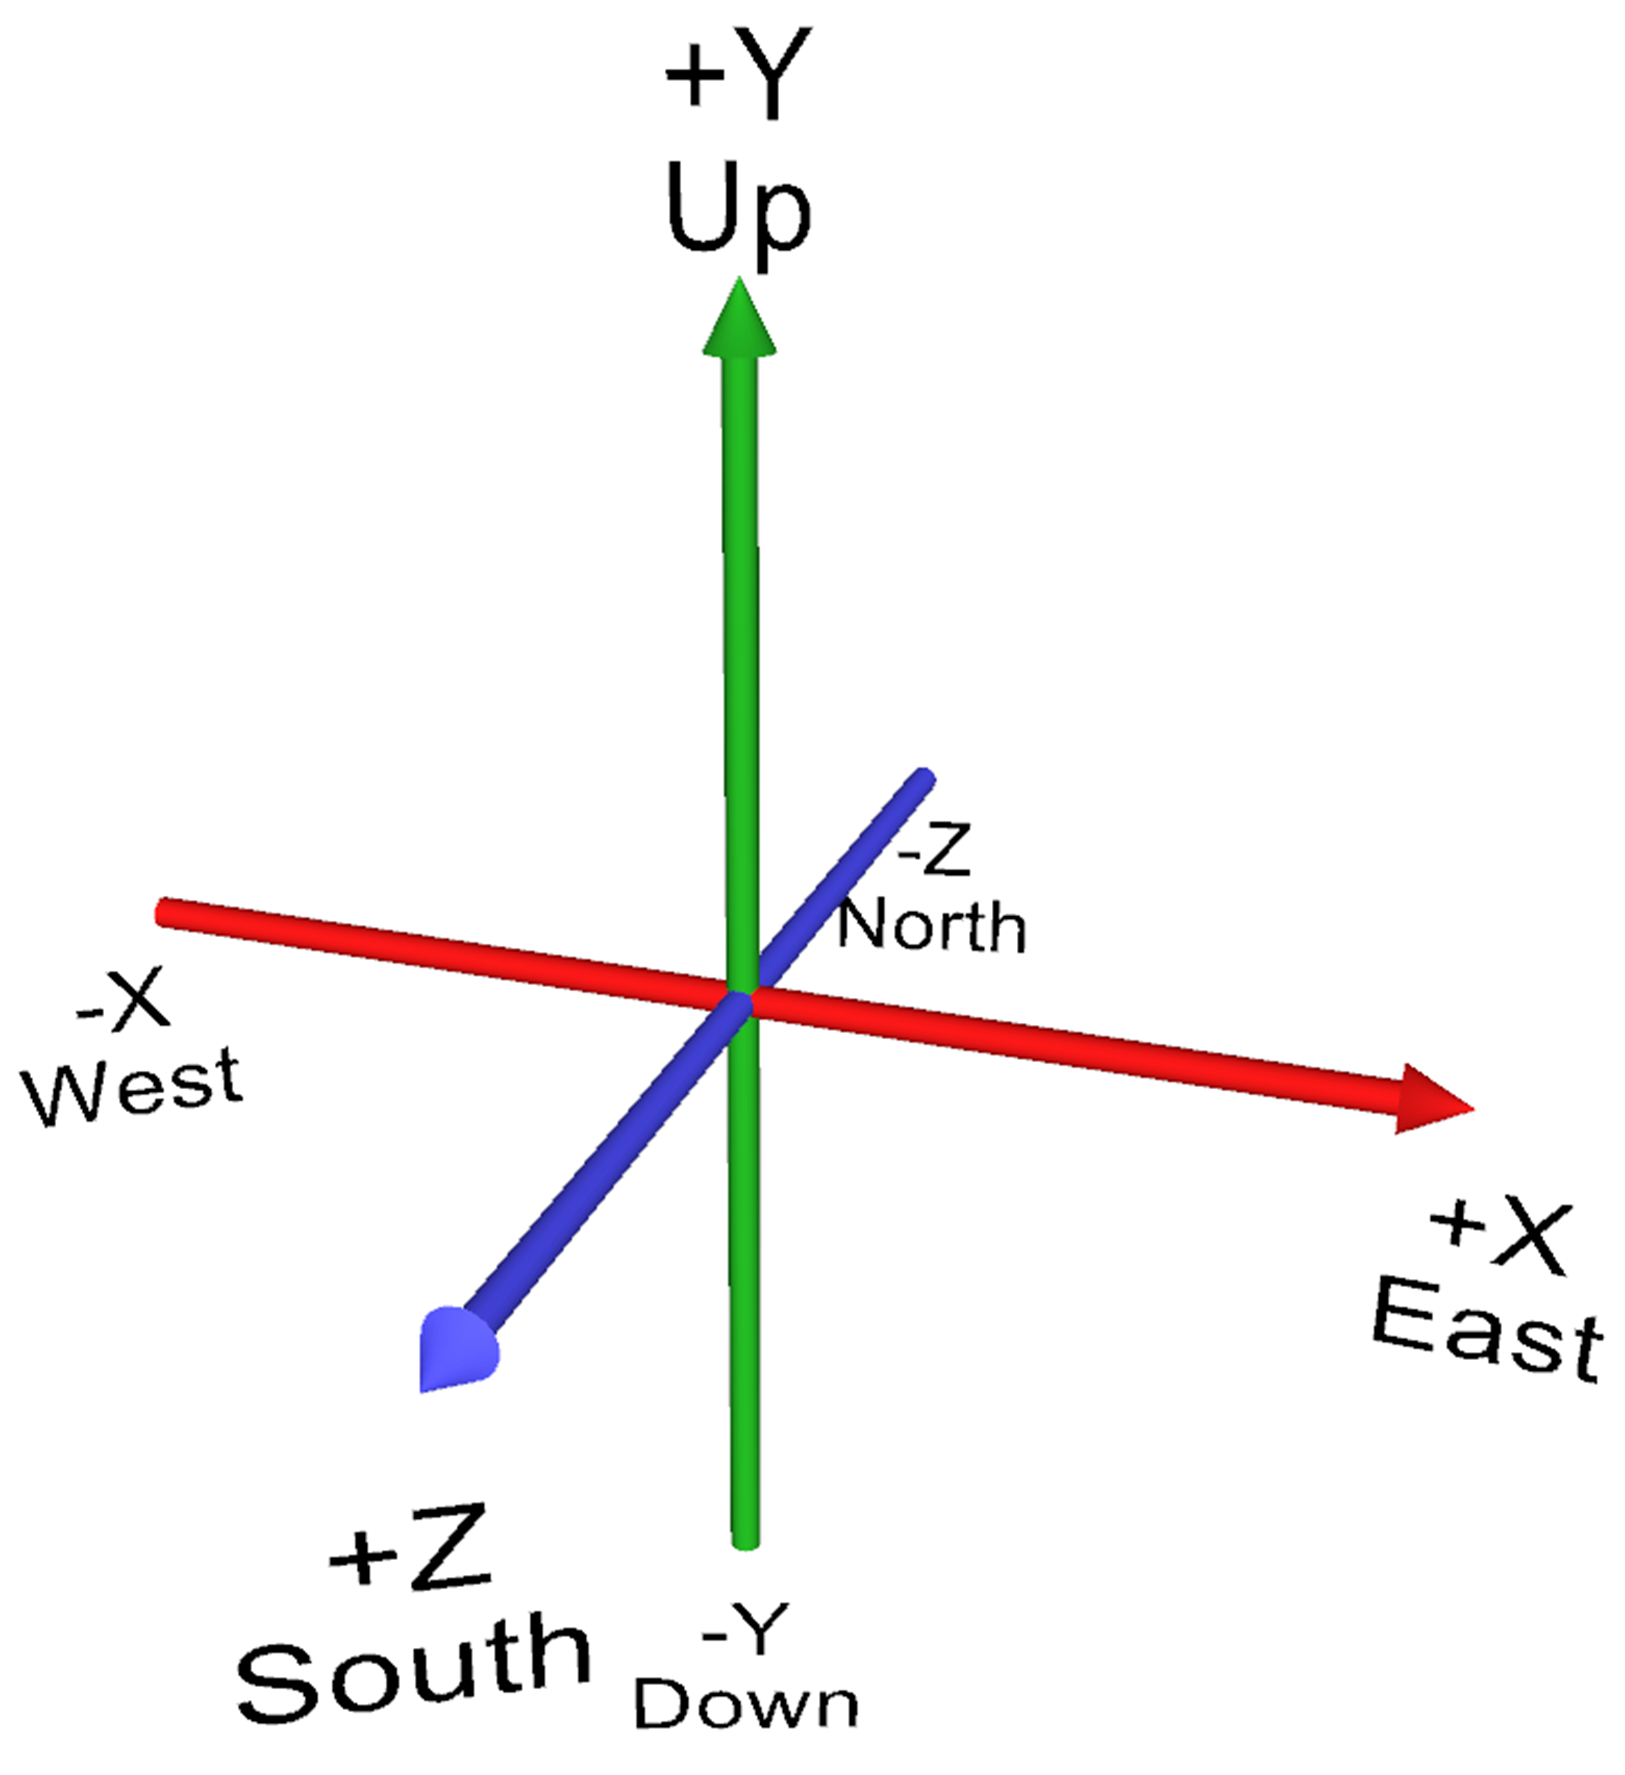 Coordinate Axes (North South East West)